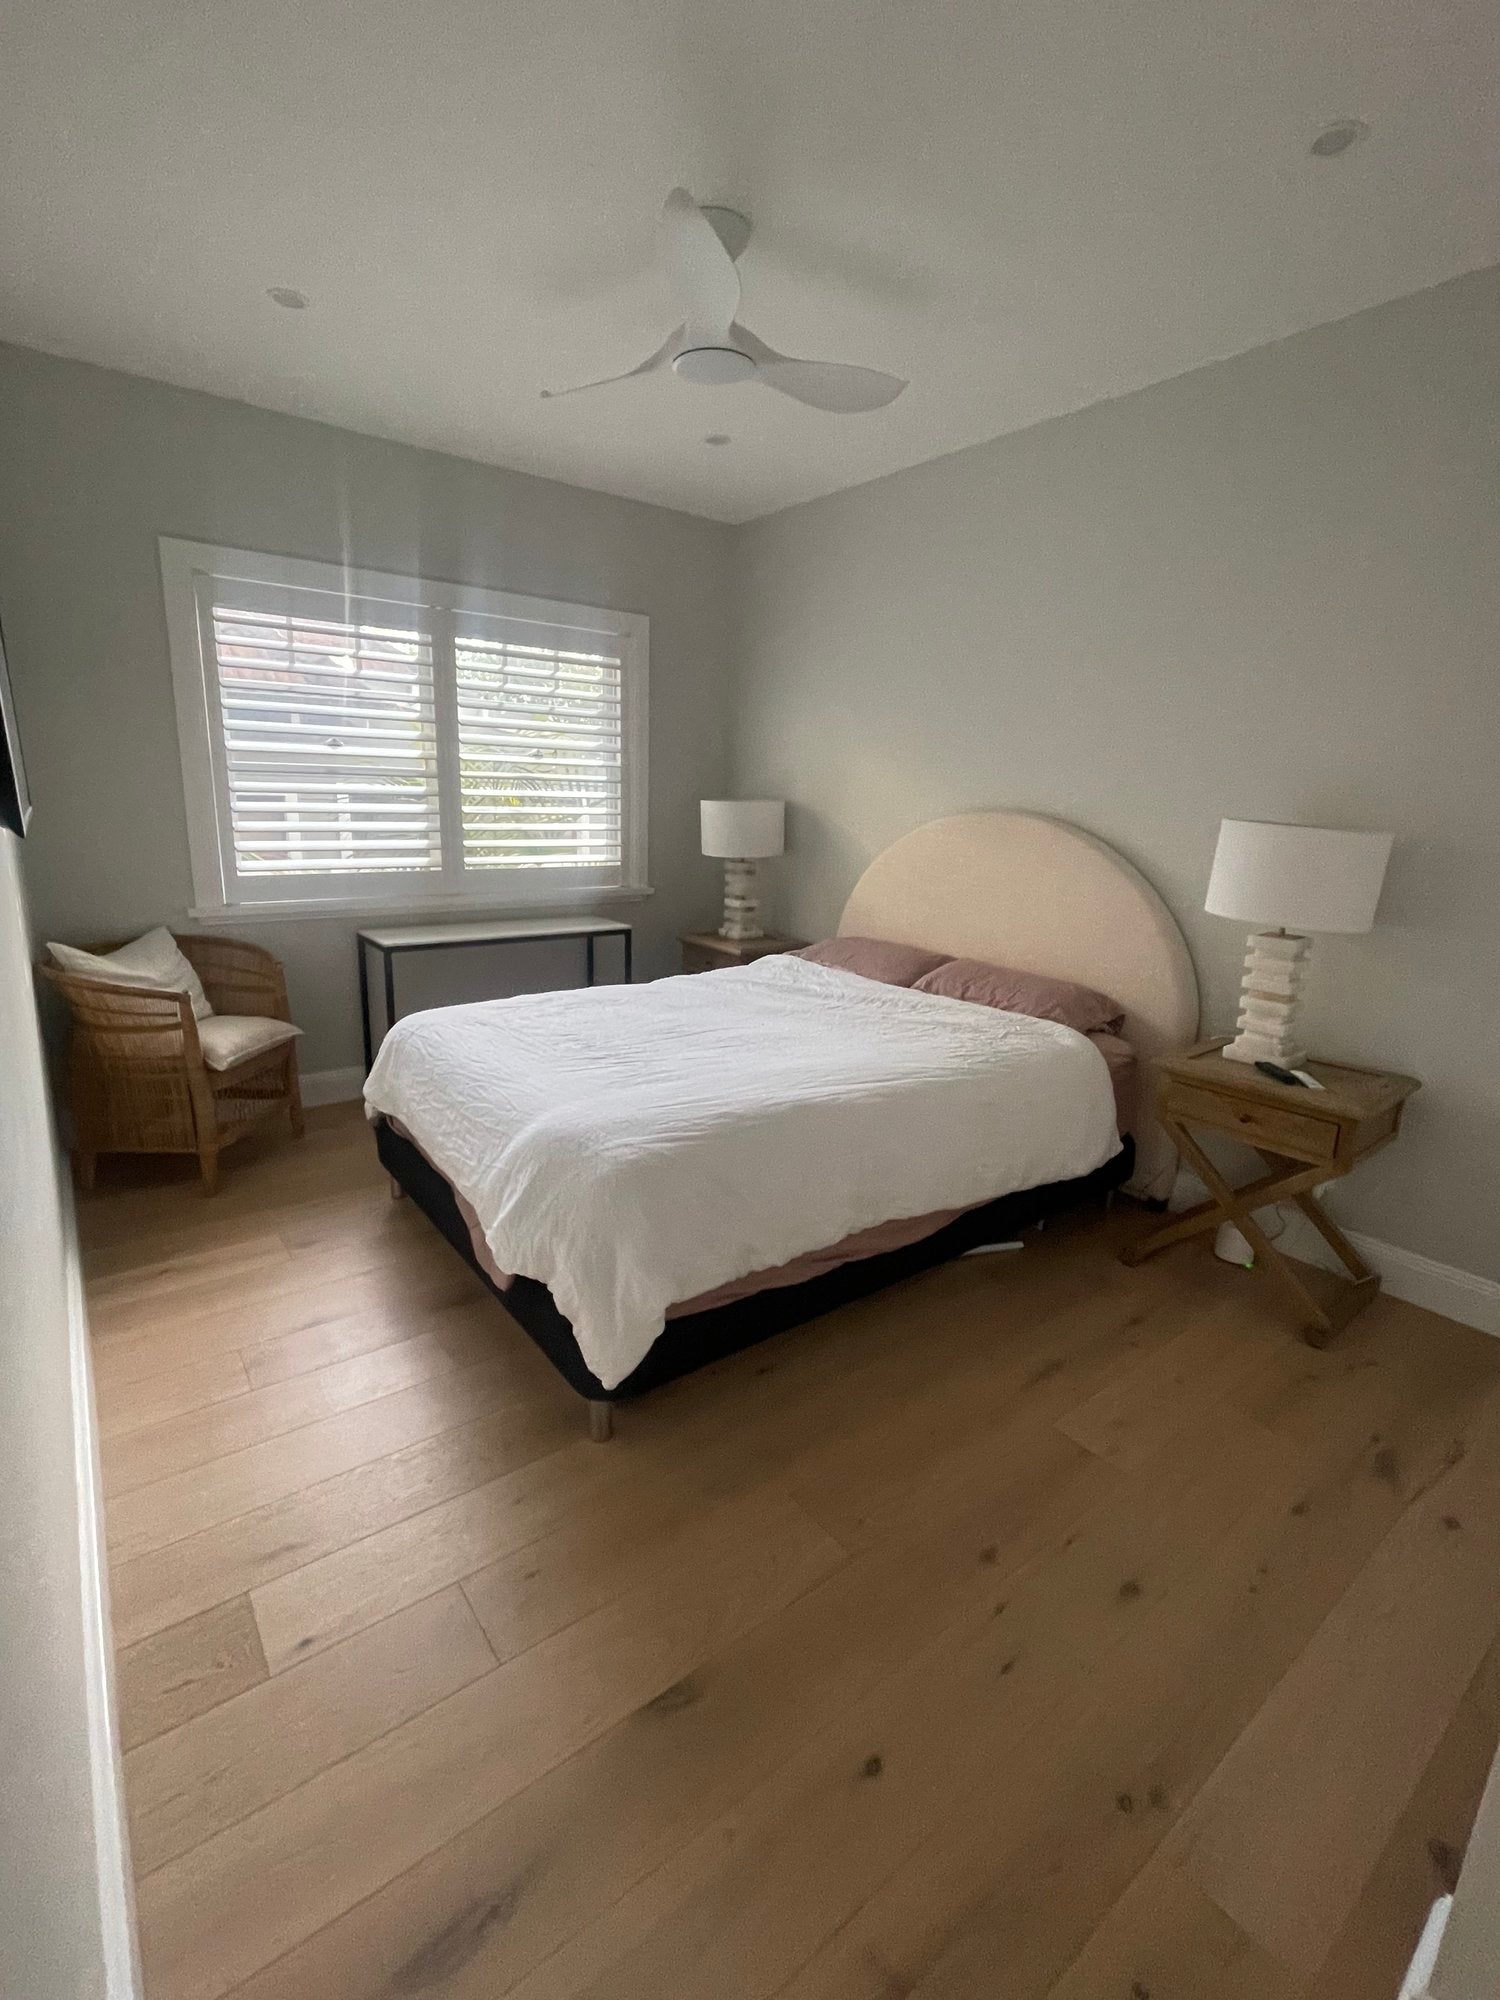 Guest bedroom makeover by Heliconia and Co.